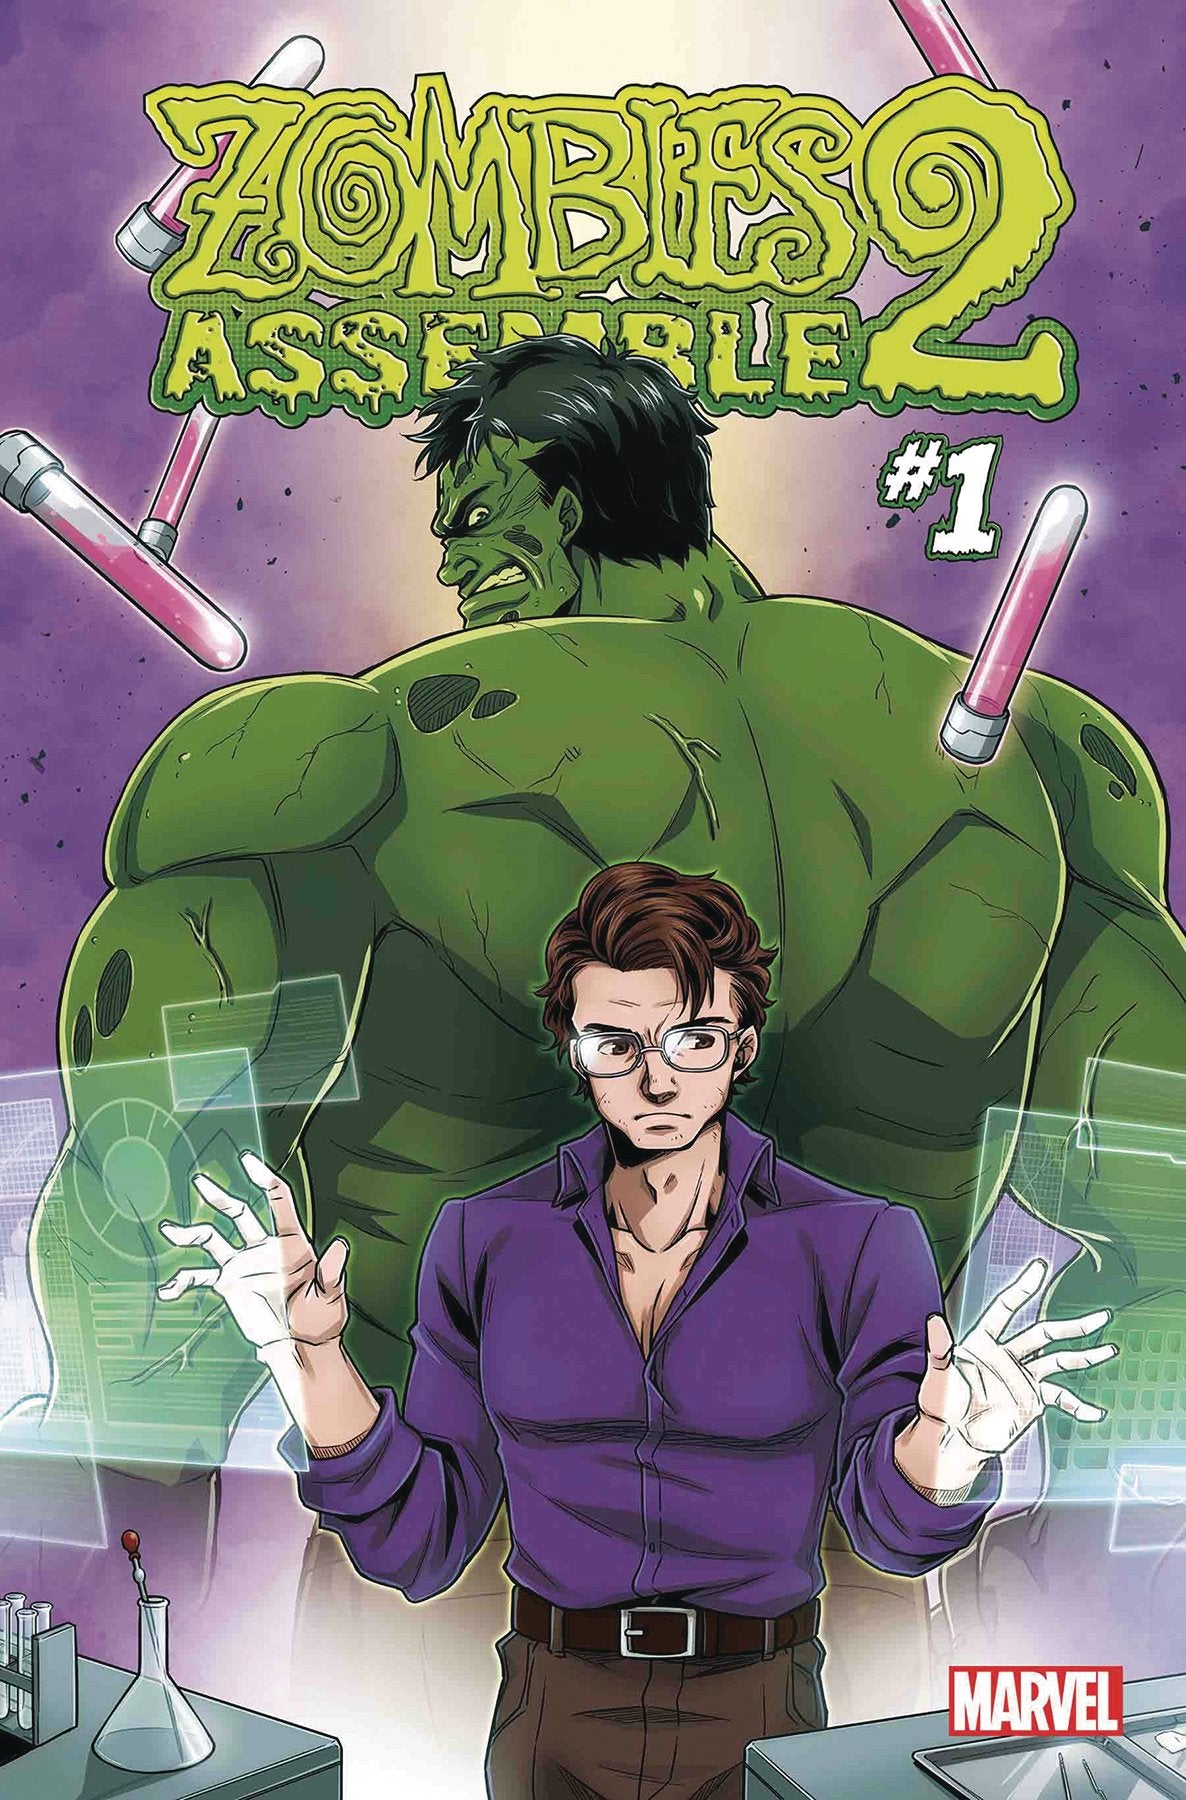 ZOMBIES ASSEMBLE 2 #1 (OF 4) COVER